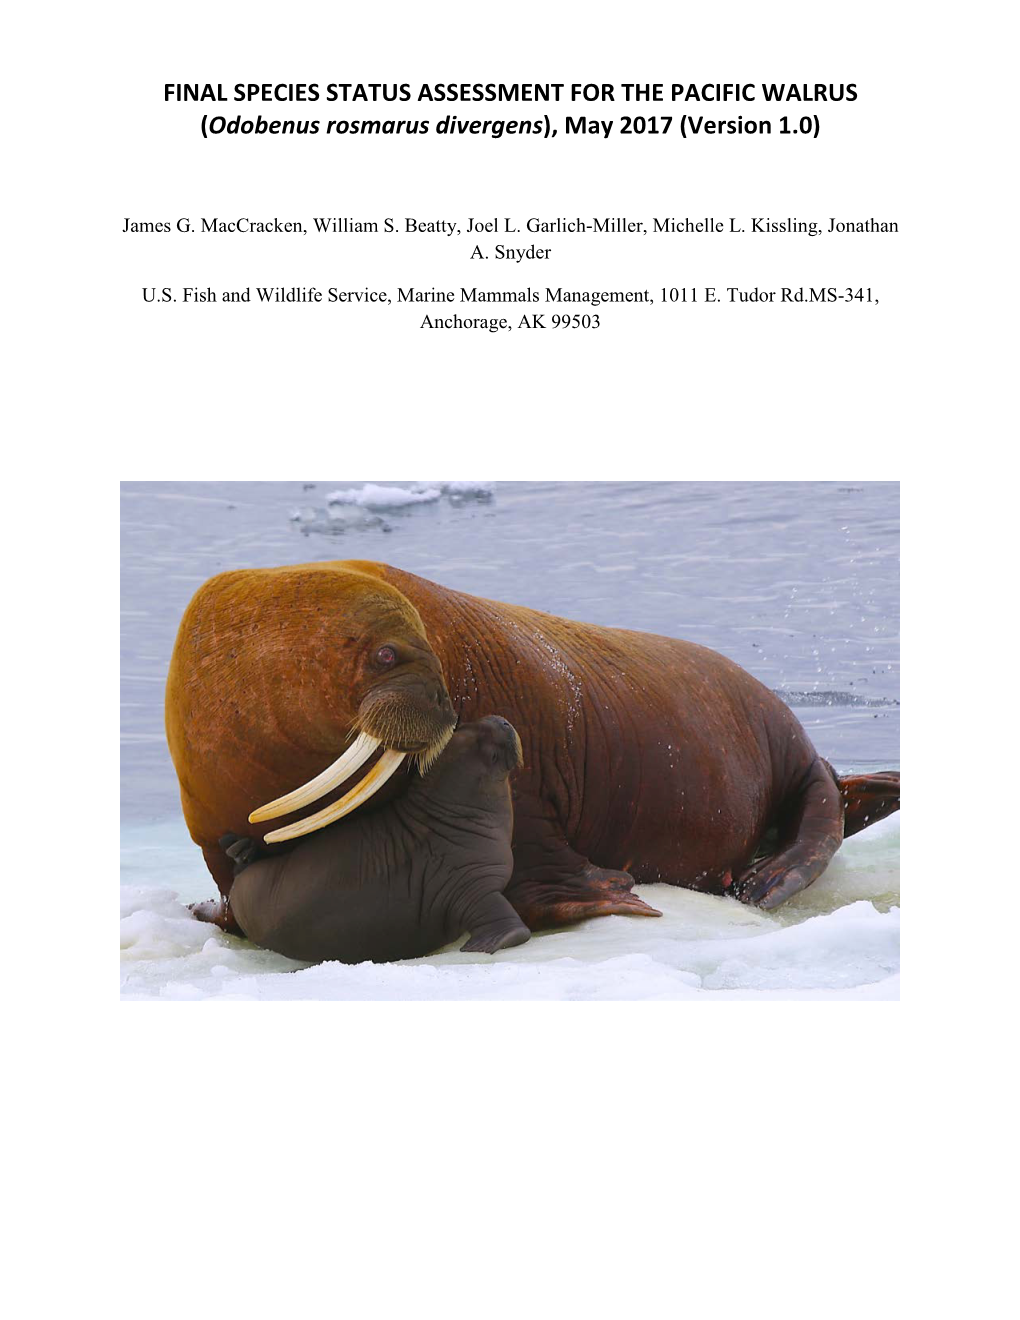 FINAL SPECIES STATUS ASSESSMENT for the PACIFIC WALRUS (Odobenus Rosmarus Divergens), May 2017 (Version 1.0)